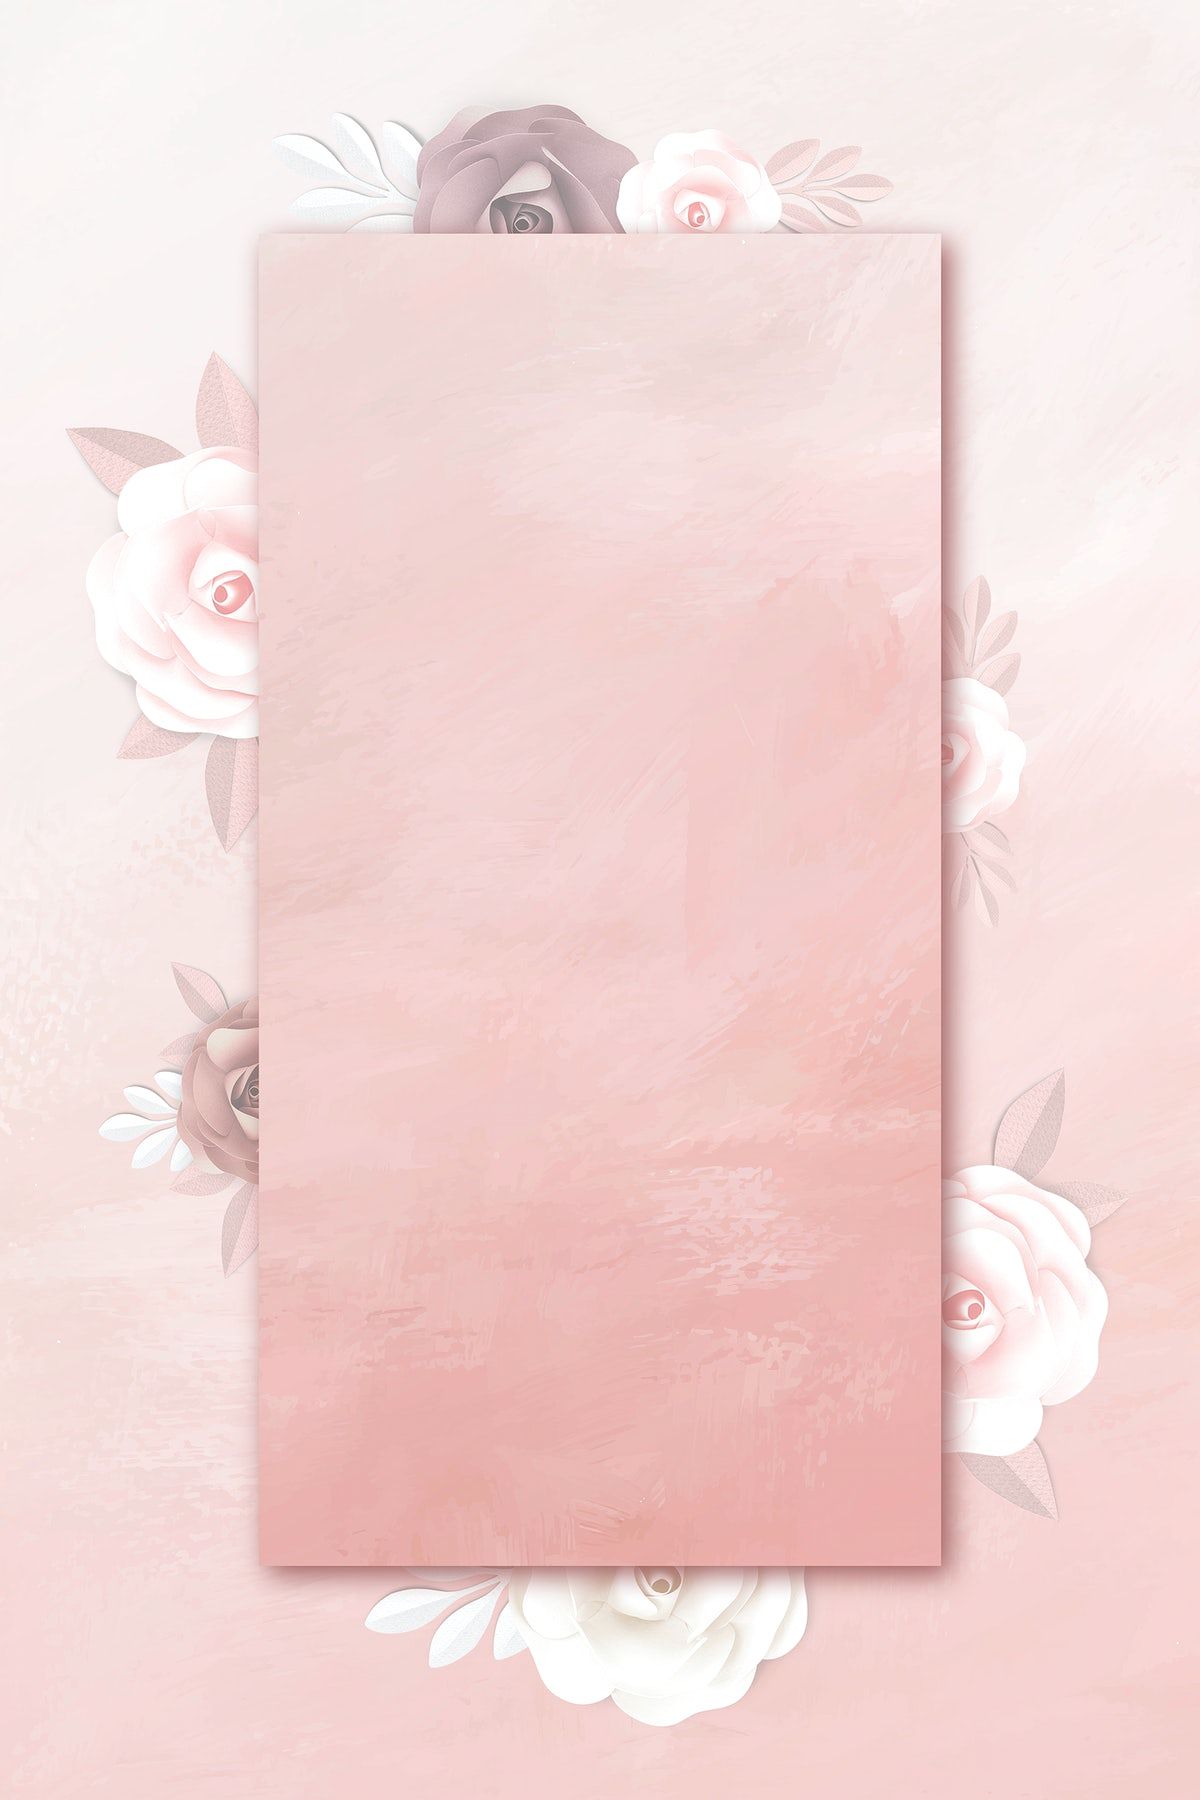 Download premium psd _ image of Rectangle paper craft flower frame vector by Techi about flora...jpg